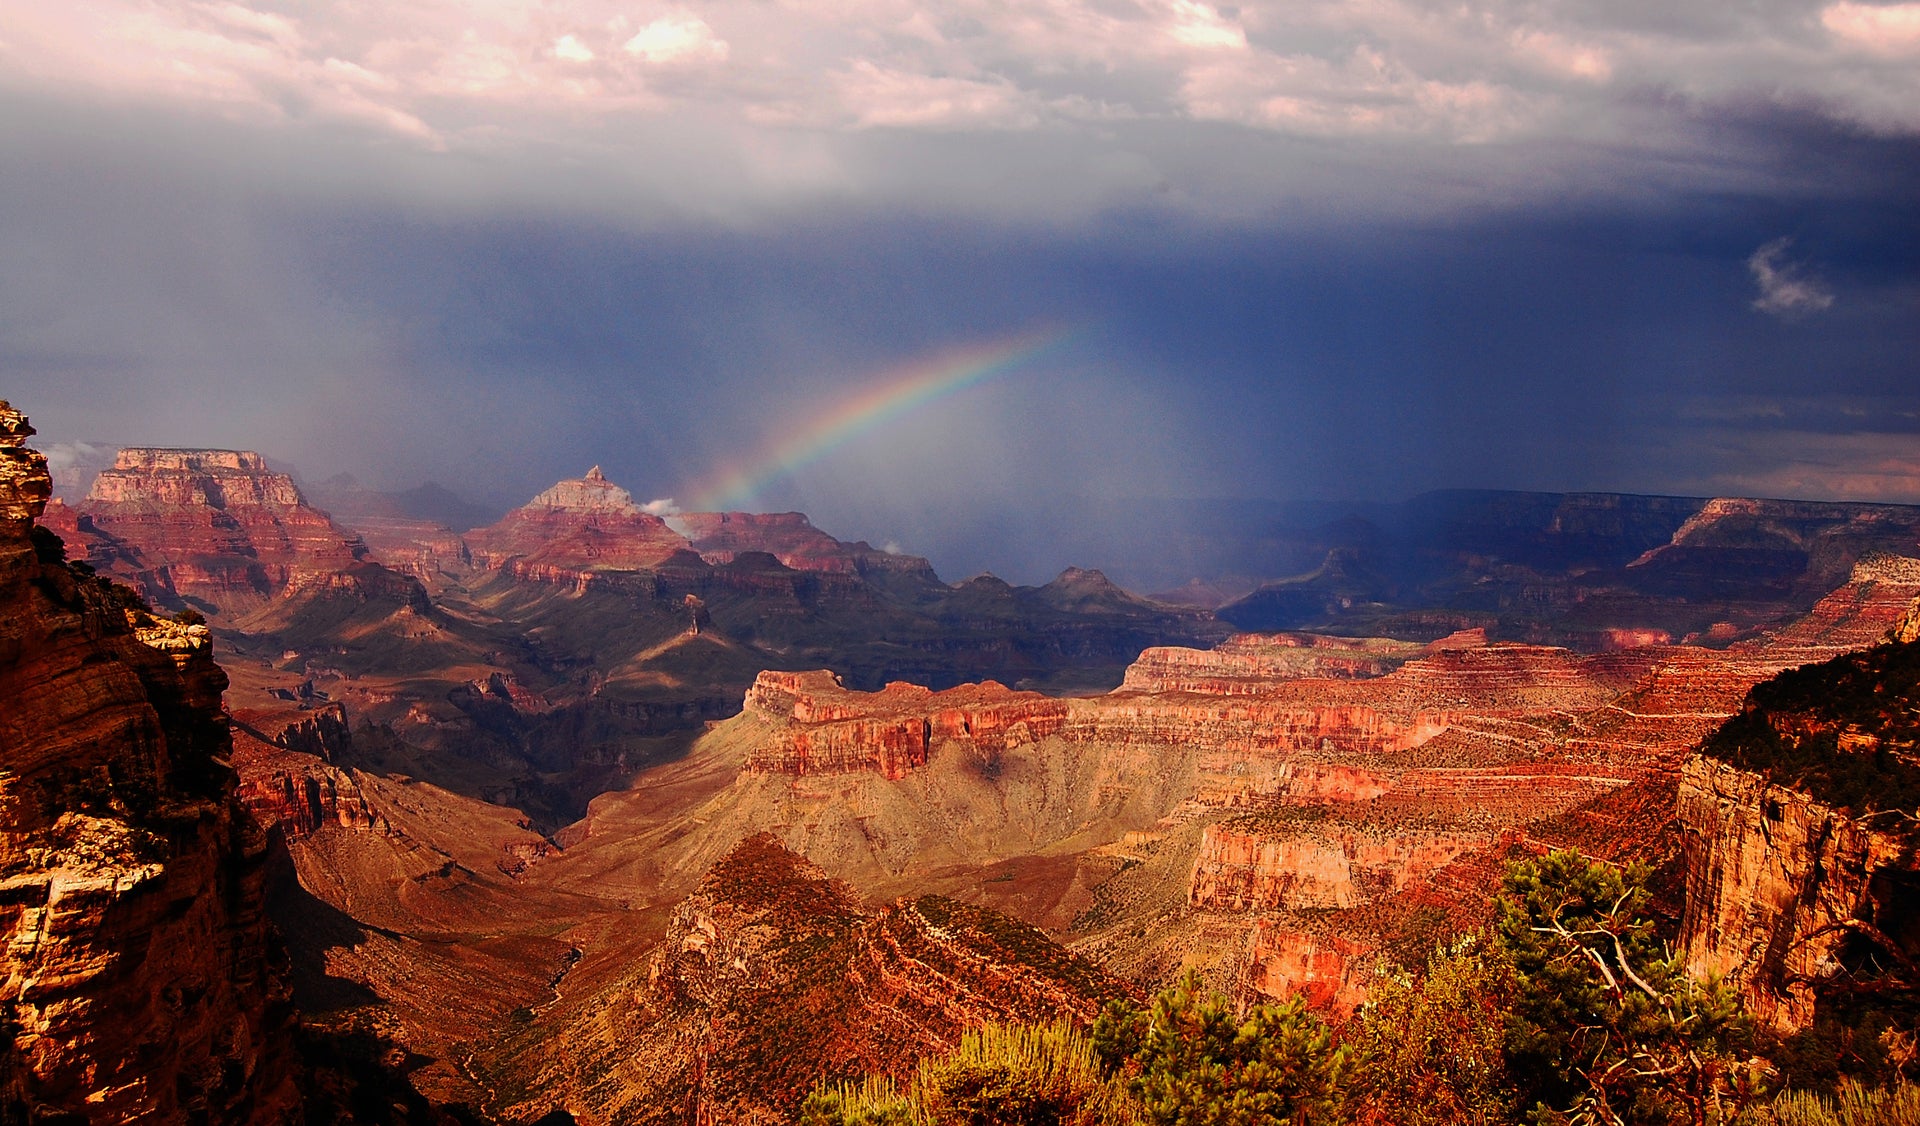 Rainbow over the Grand Canyon - Crosscountrycreations